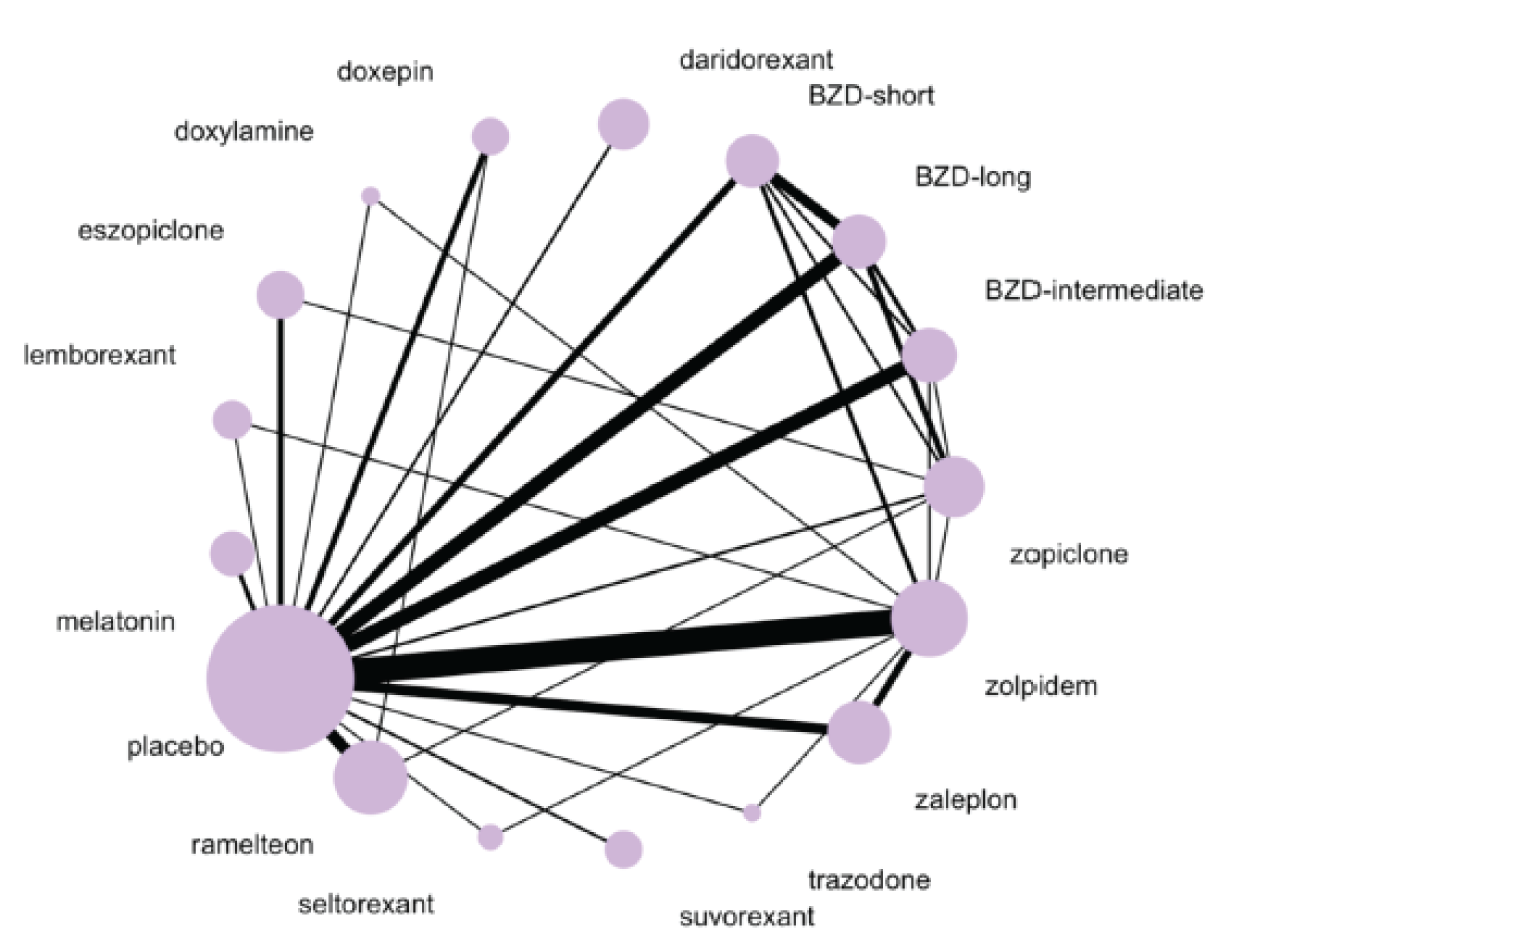 The network consists of a main placebo node (the biggest node) connected to 16 nodes for each intervention. Between these, several closed loops are found that all include placebo and most commonly include 1 of the benzodiazepine nodes, zolpidem, and/or zopiclone.